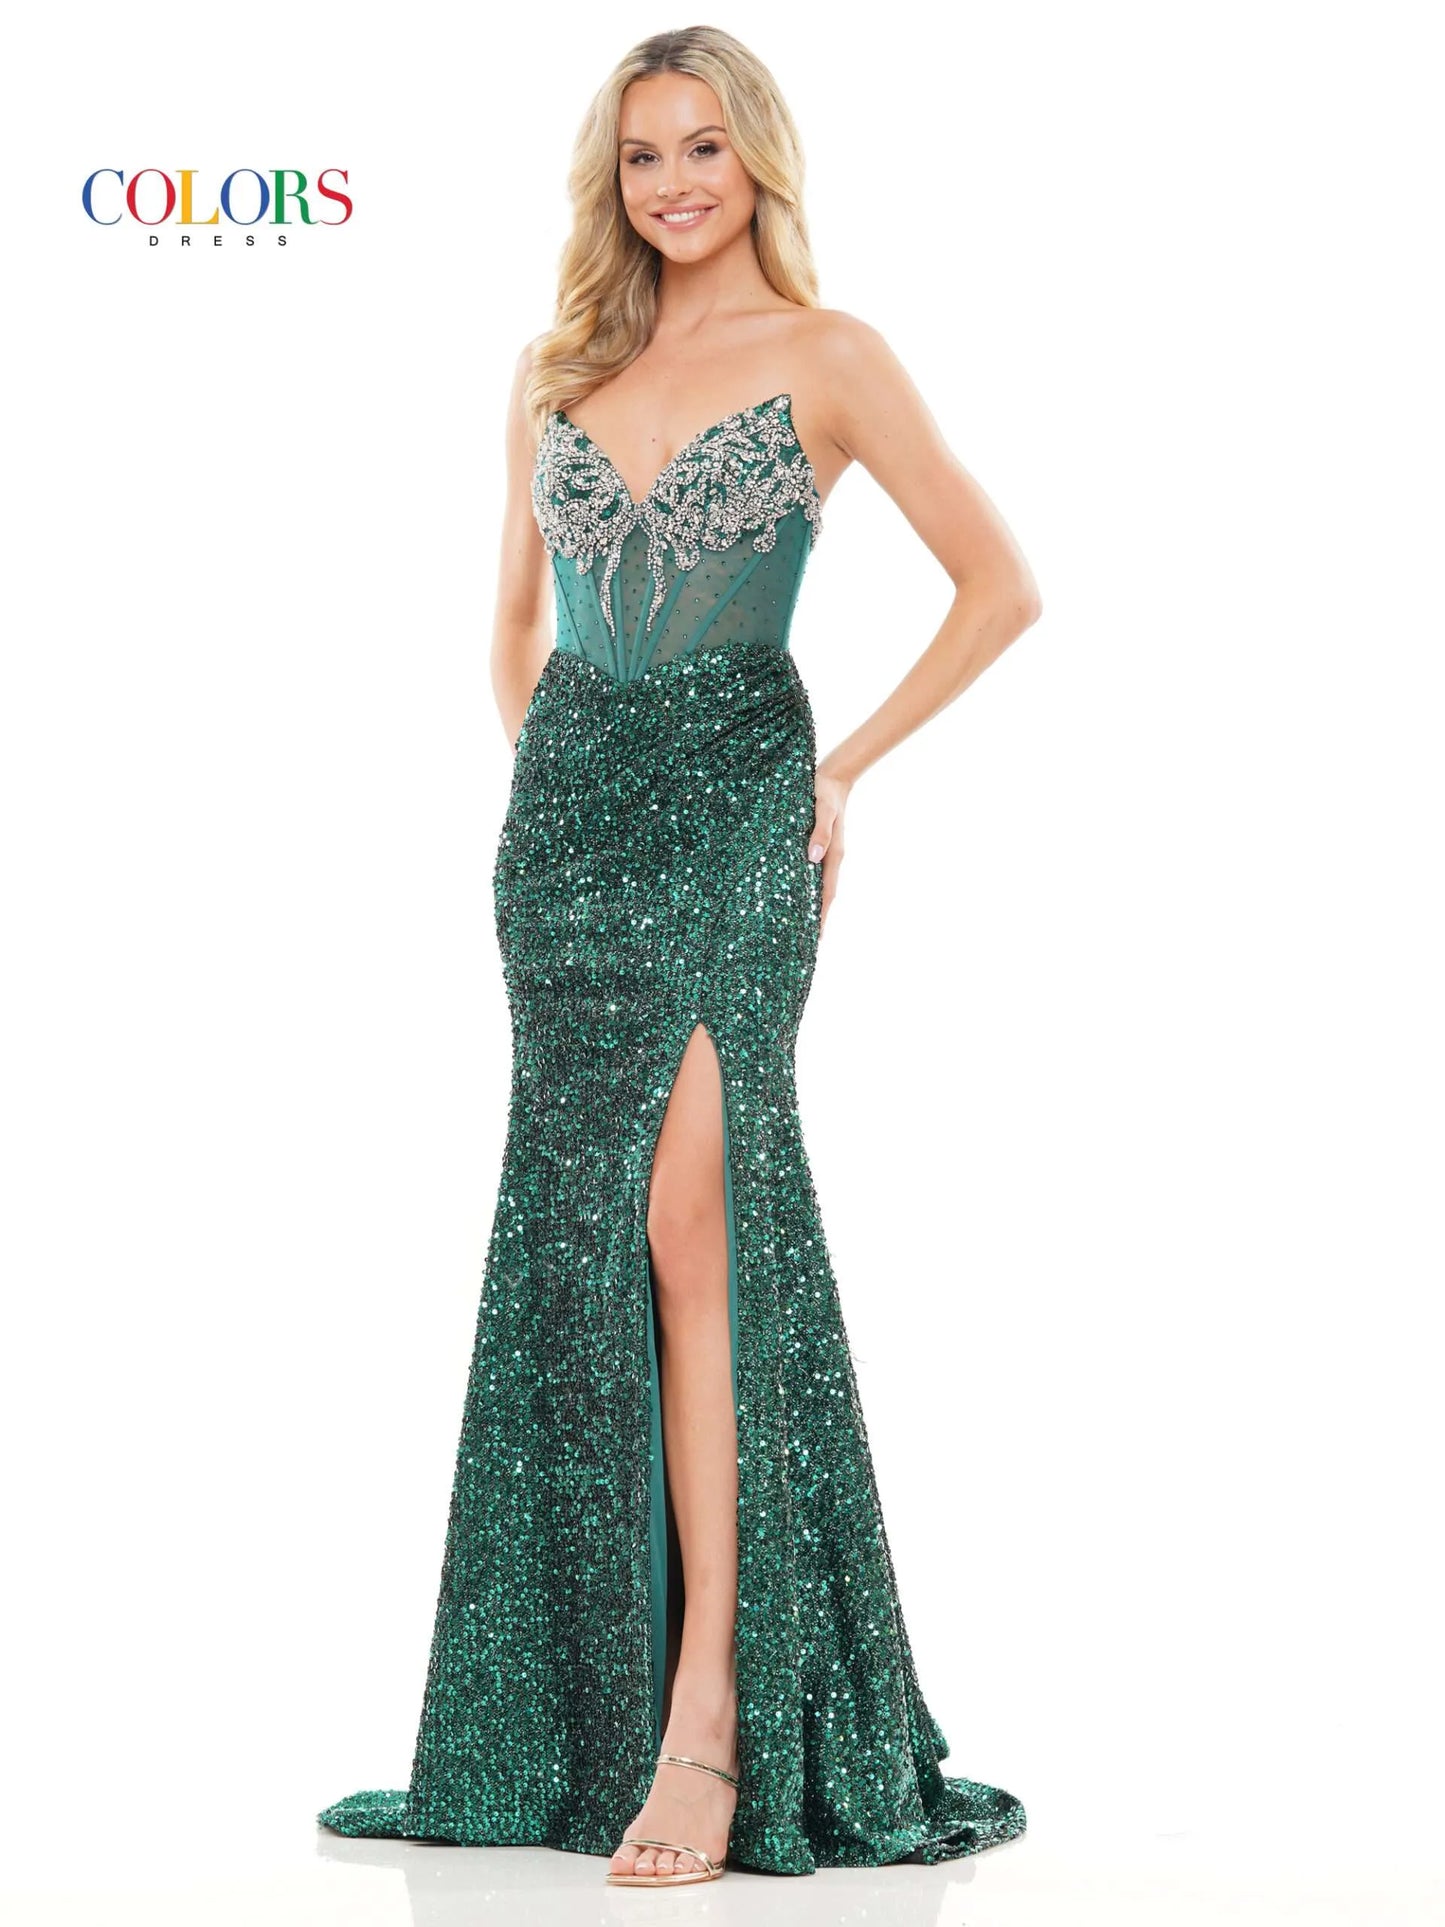 Look stunning in the Colors Dress 3274 Prom Dress. The sheer, beaded corset highlights a peak point v neckline while the sequin fitted silhouette and ruched gown add elegance. With a slit to show off your legs, this dress is perfect for any special occasion.  Sizes: 0-20  Colors: Black, Red, Royal, Deep Green